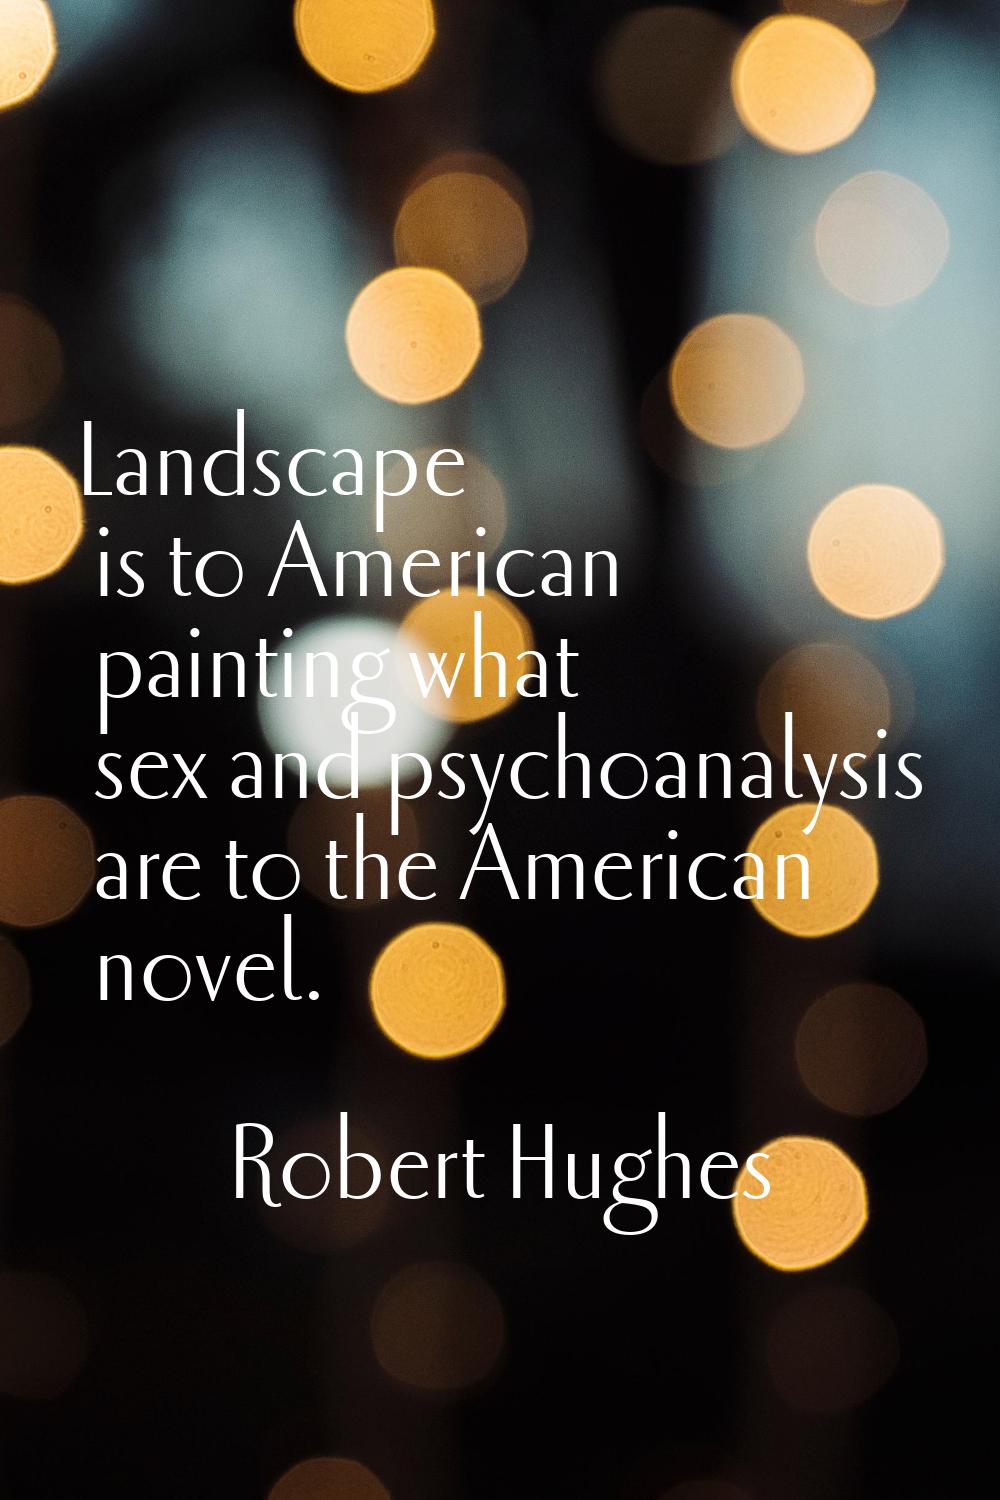 Landscape is to American painting what sex and psychoanalysis are to the American novel.